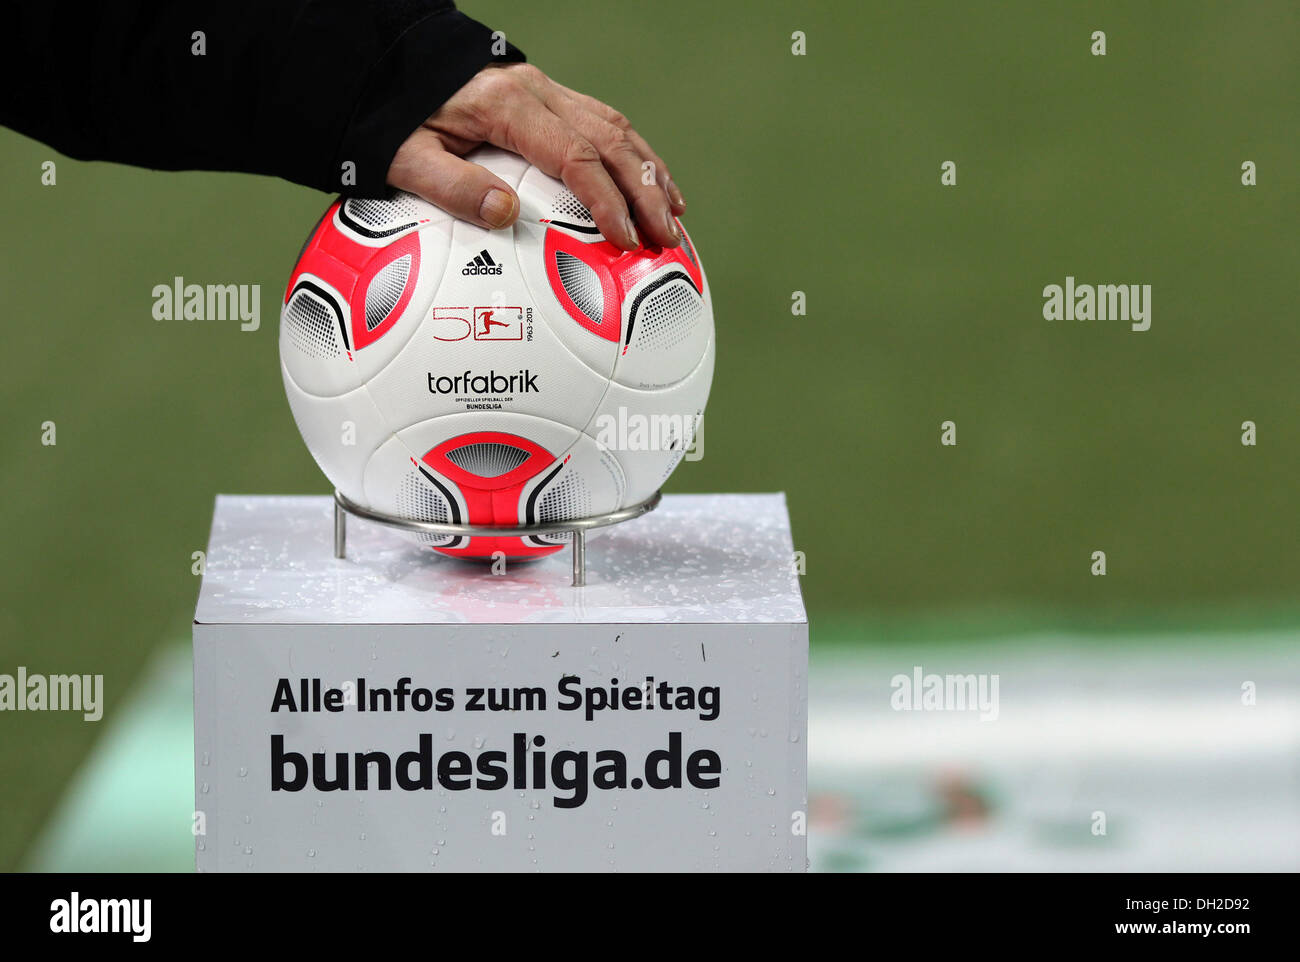 Ball for the match displayed before the start of the match between FC Kaiserslautern and Erzgebirge Aue, Fritz-Walter-Stadion Stock Photo